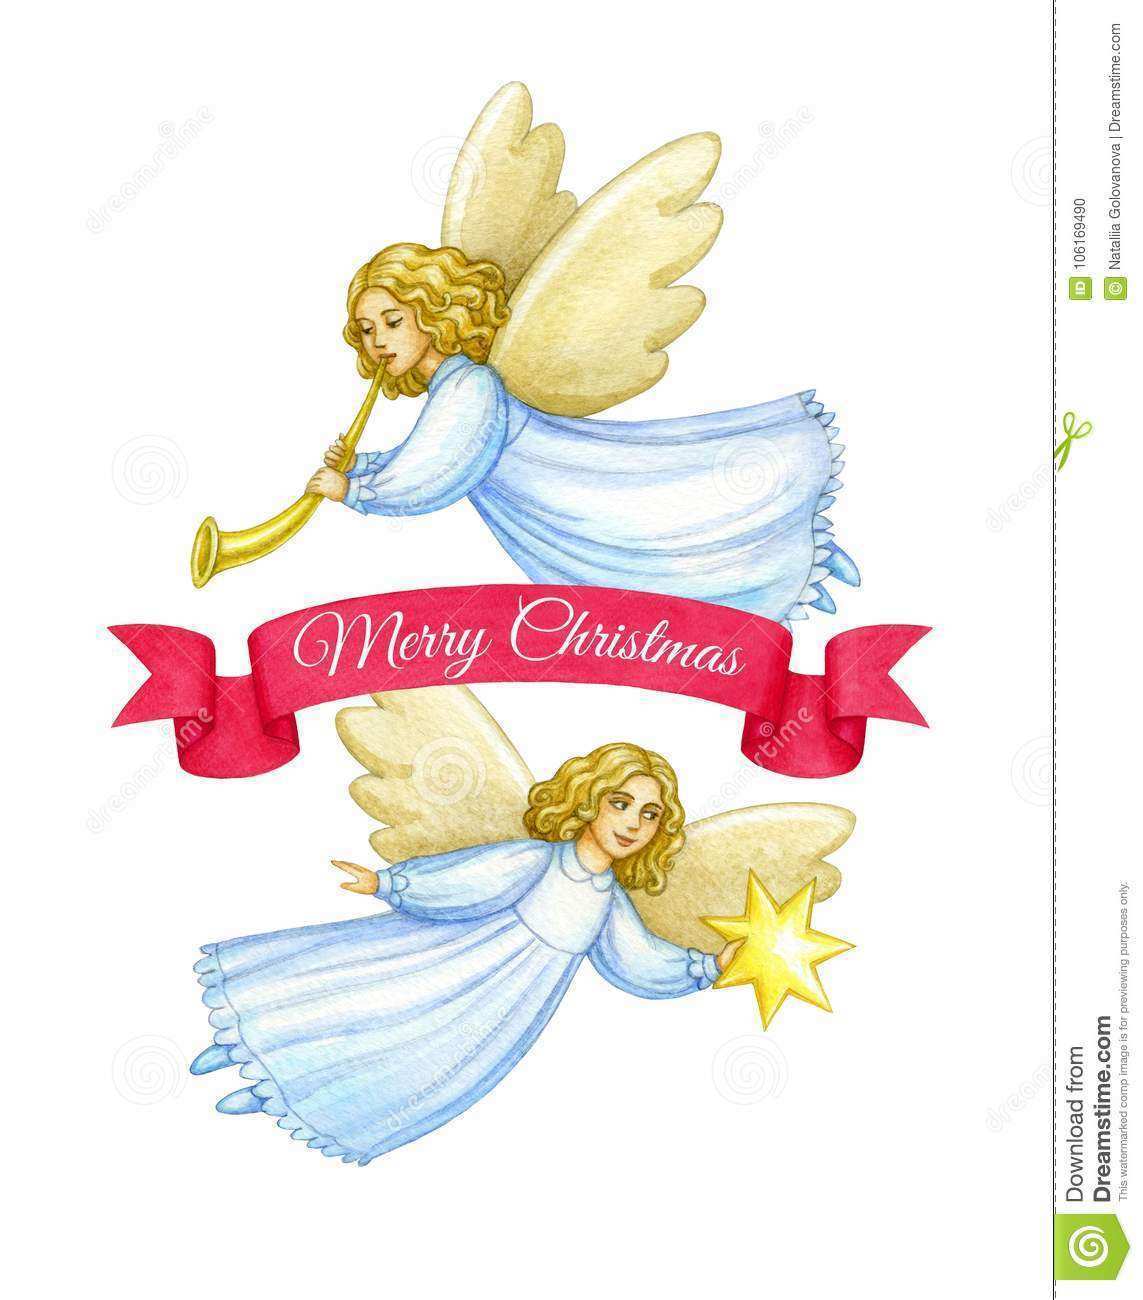 52 Customize Angel Christmas Card Template in Photoshop by Angel Christmas Card Template